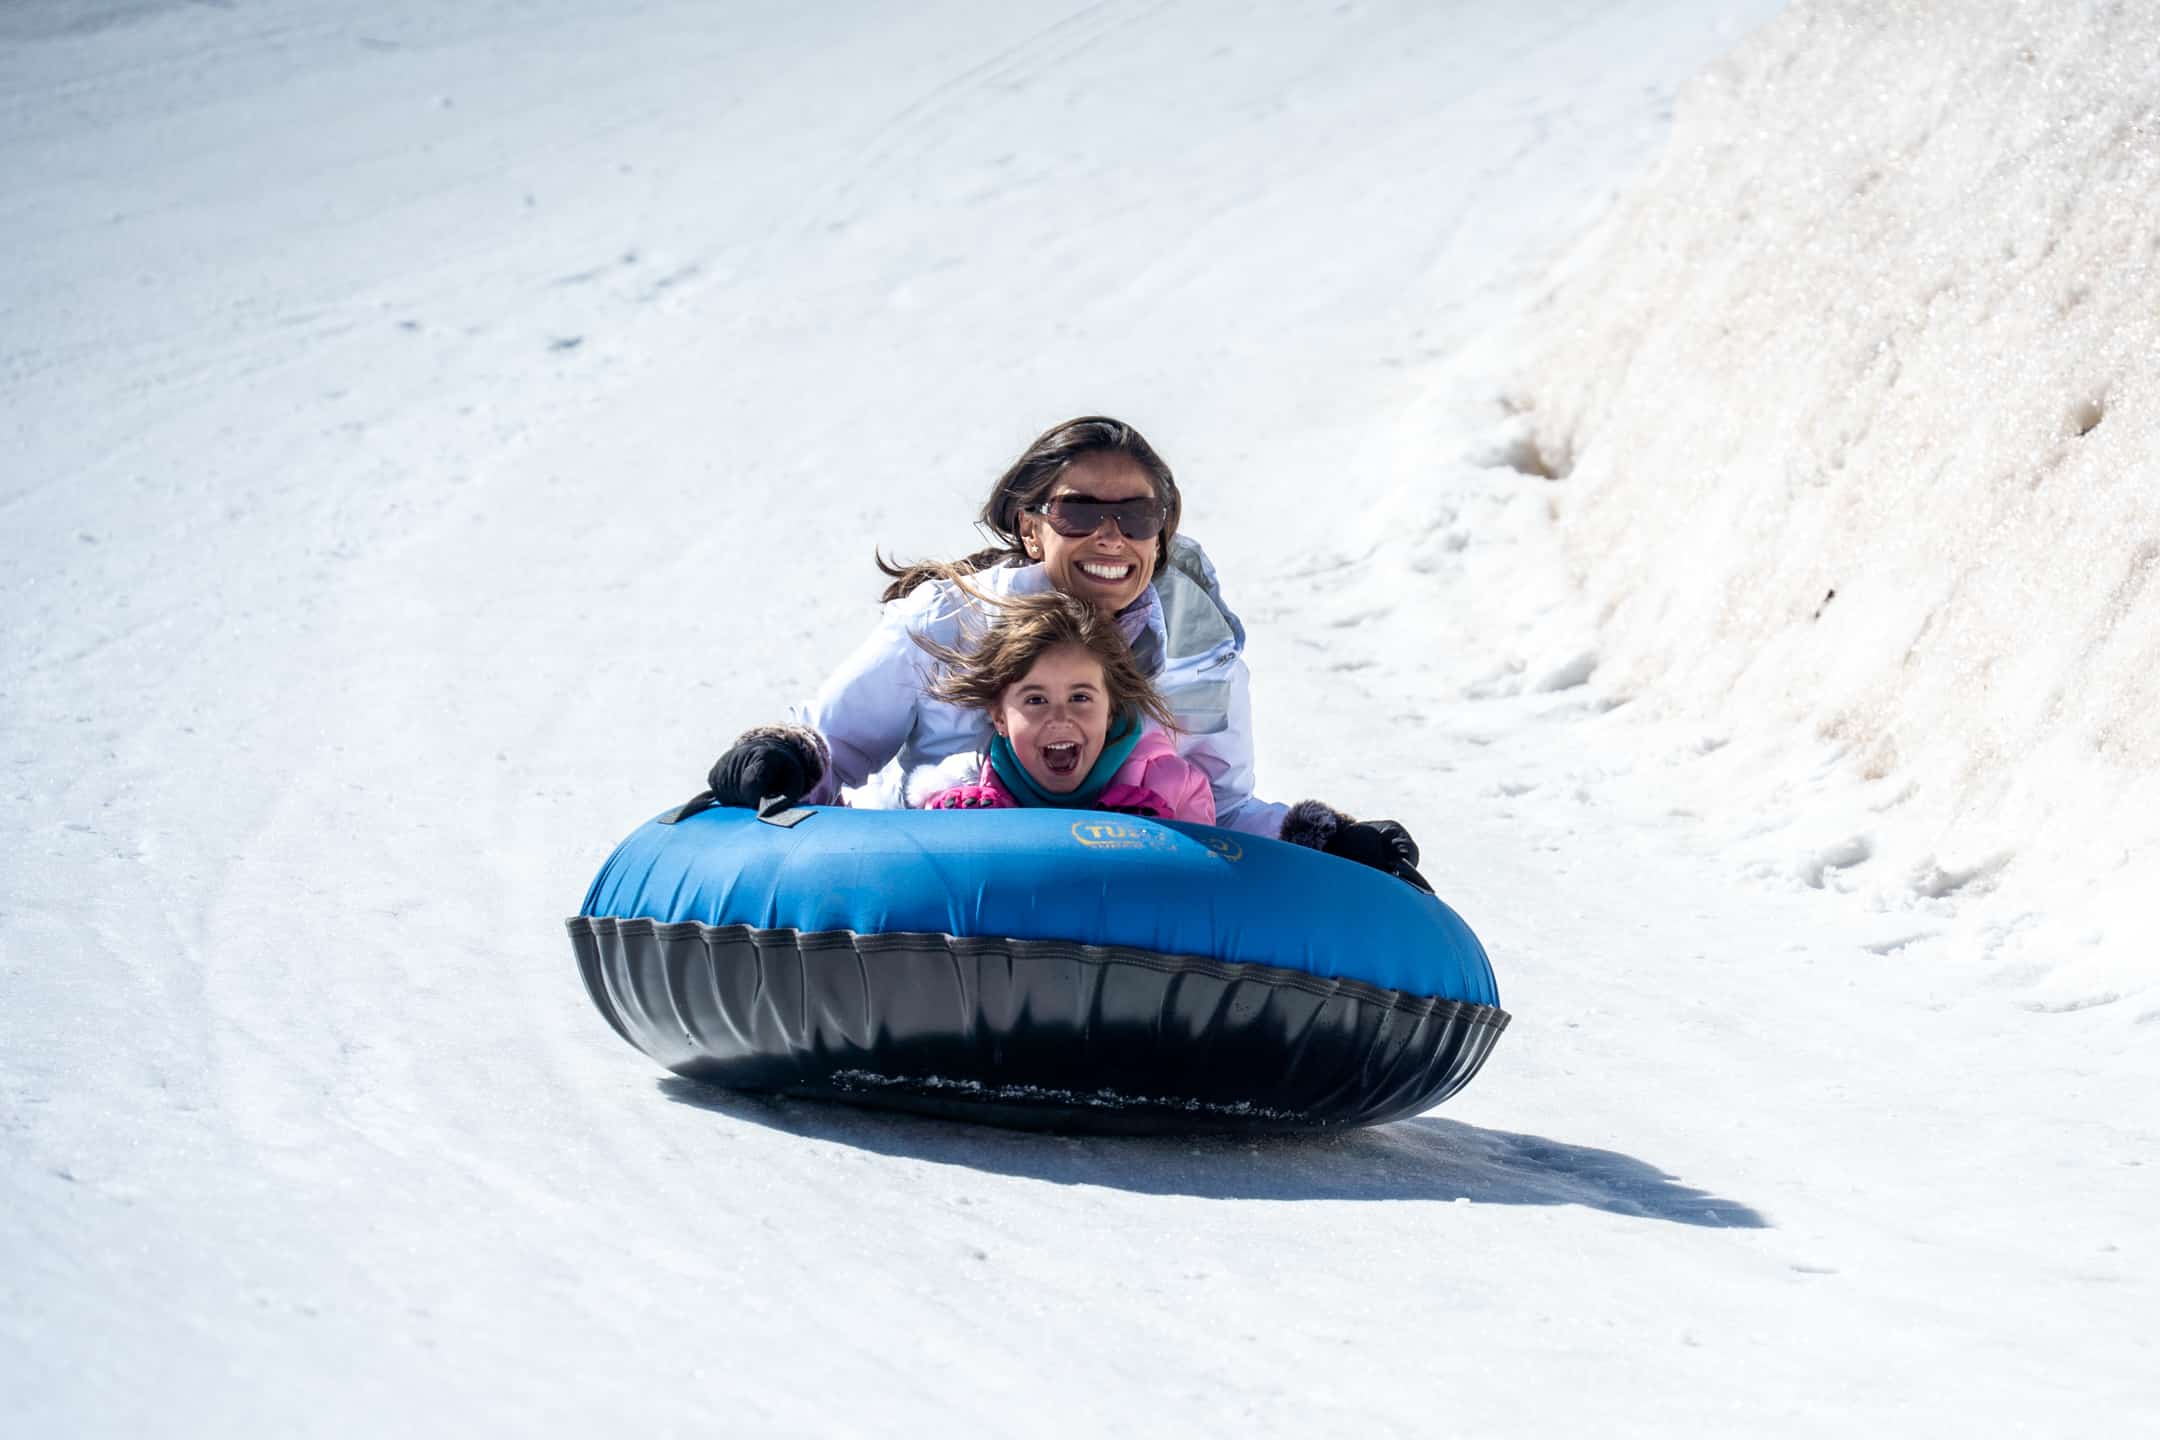 Pure enjoyment captured as mom and daughter glide down the tubing hill head first